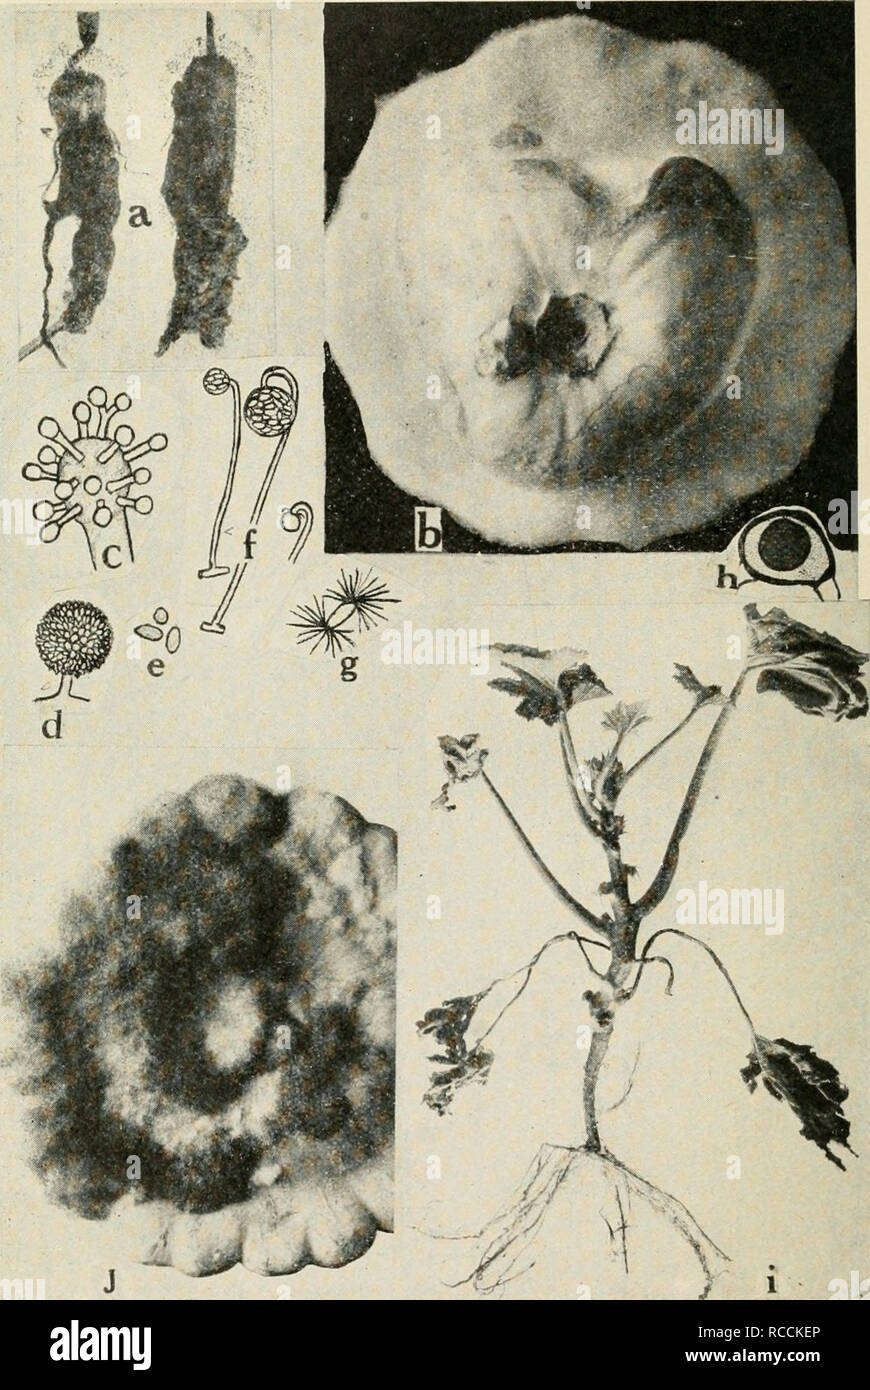 . Diseases of truck crops and their control. Vegetables. Fig. 41. Squash Diseases. a. Showing squash blossoms invaded by the fungus Choanophora cucurbitarum, b. squash entirely rotted by the Choanophora fungus, c. young conidiophore of Choanophora with ramuli developing on the primary vesicle, d. mature capitulum covered with a layer of conidia, e. conidia, /. sporangia and columella, g. sporangio spores with tufts of hair-like appendages, h. mature zygospore («, c. to /;. after Wolf), i. Pusarium wilt of young squash plants,./. Rhizopus rot.. Please note that these images are extracted from s Stock Photo